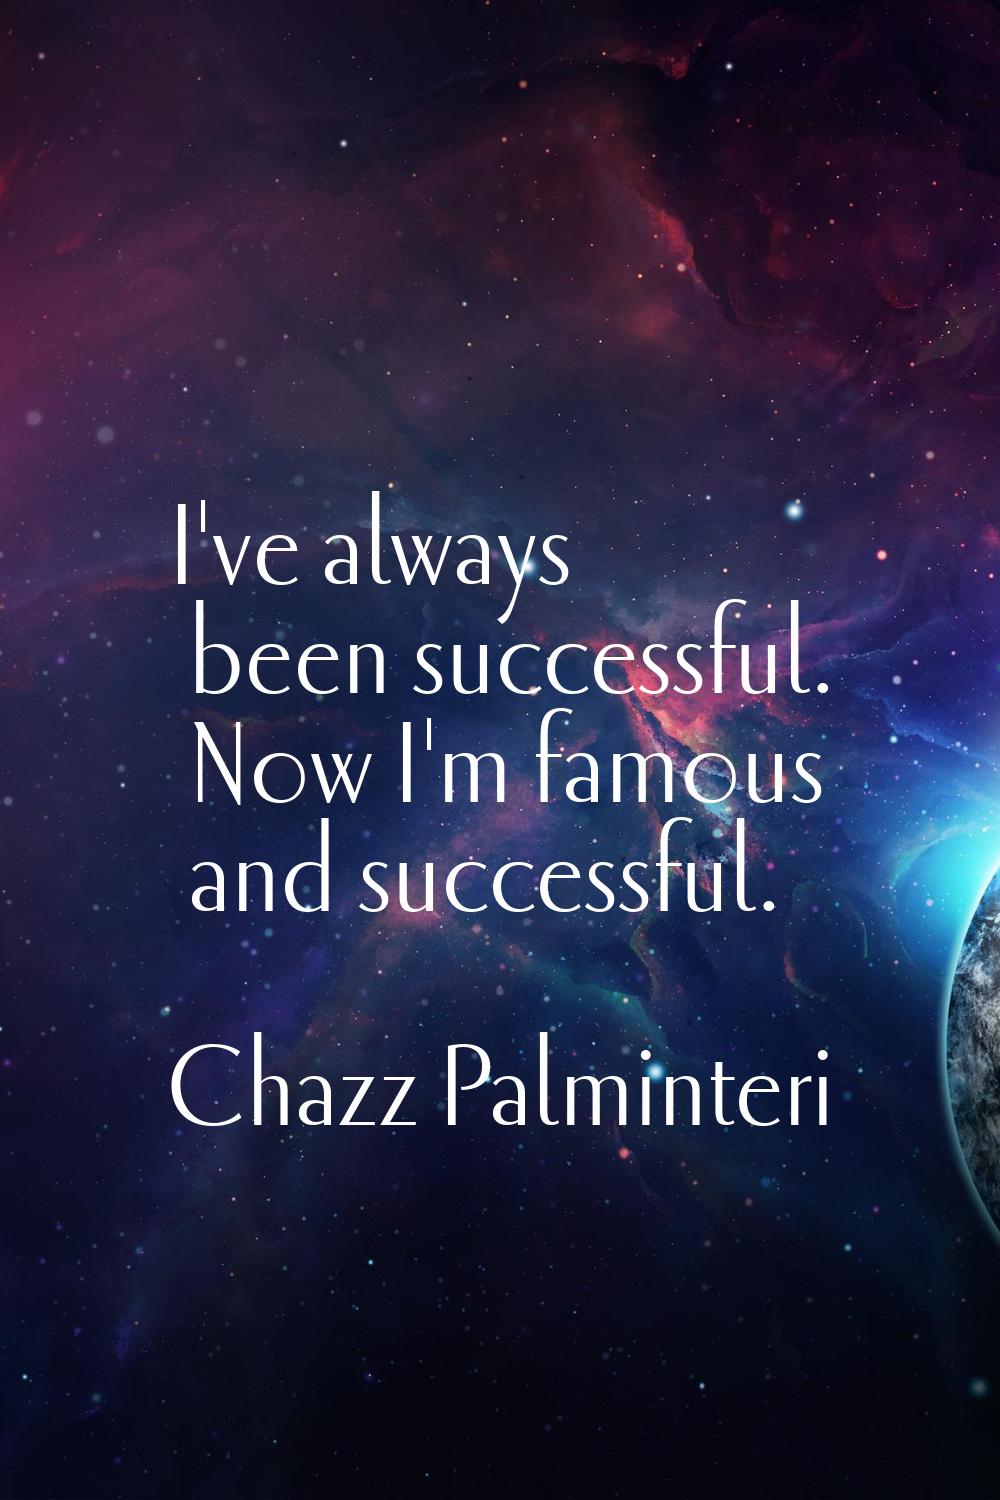 I've always been successful. Now I'm famous and successful.